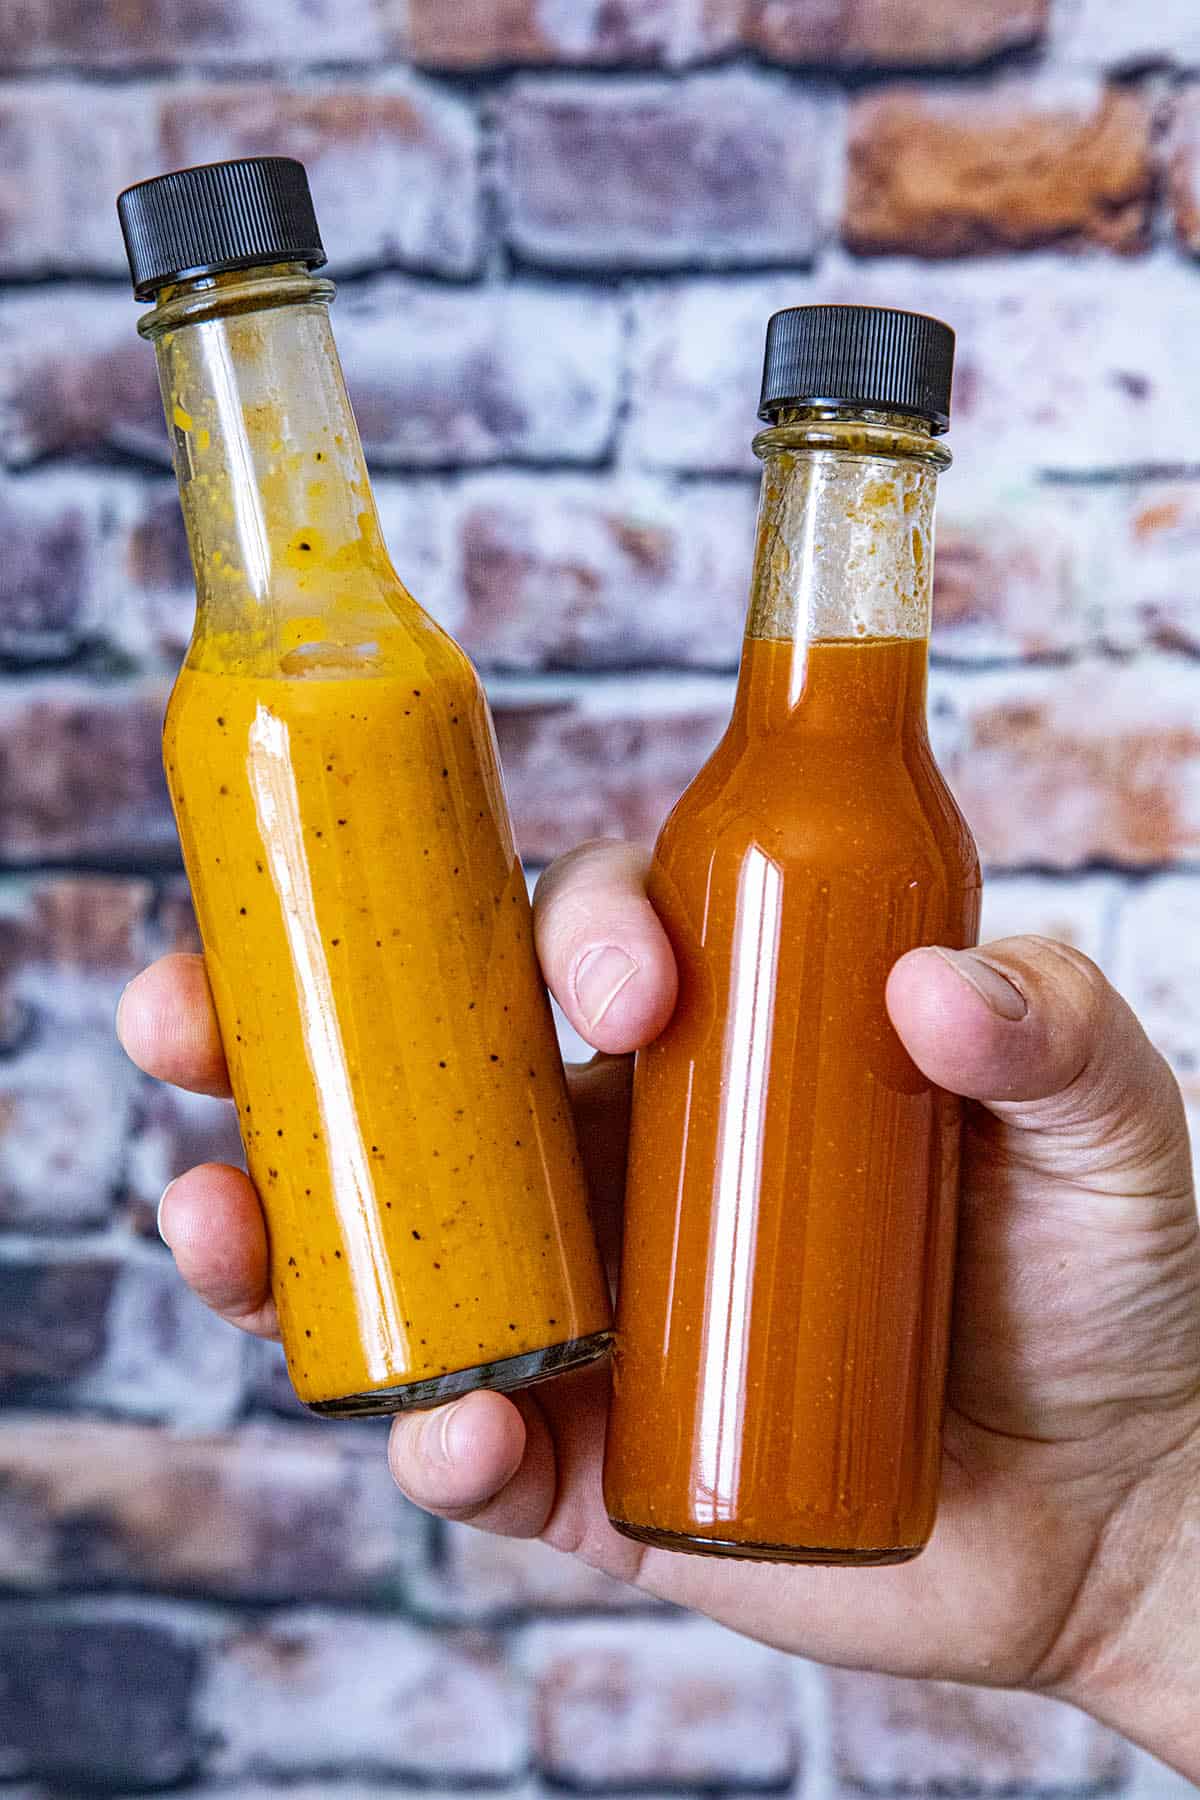 2 bottles of hot sauce, both made from dried chili peppers